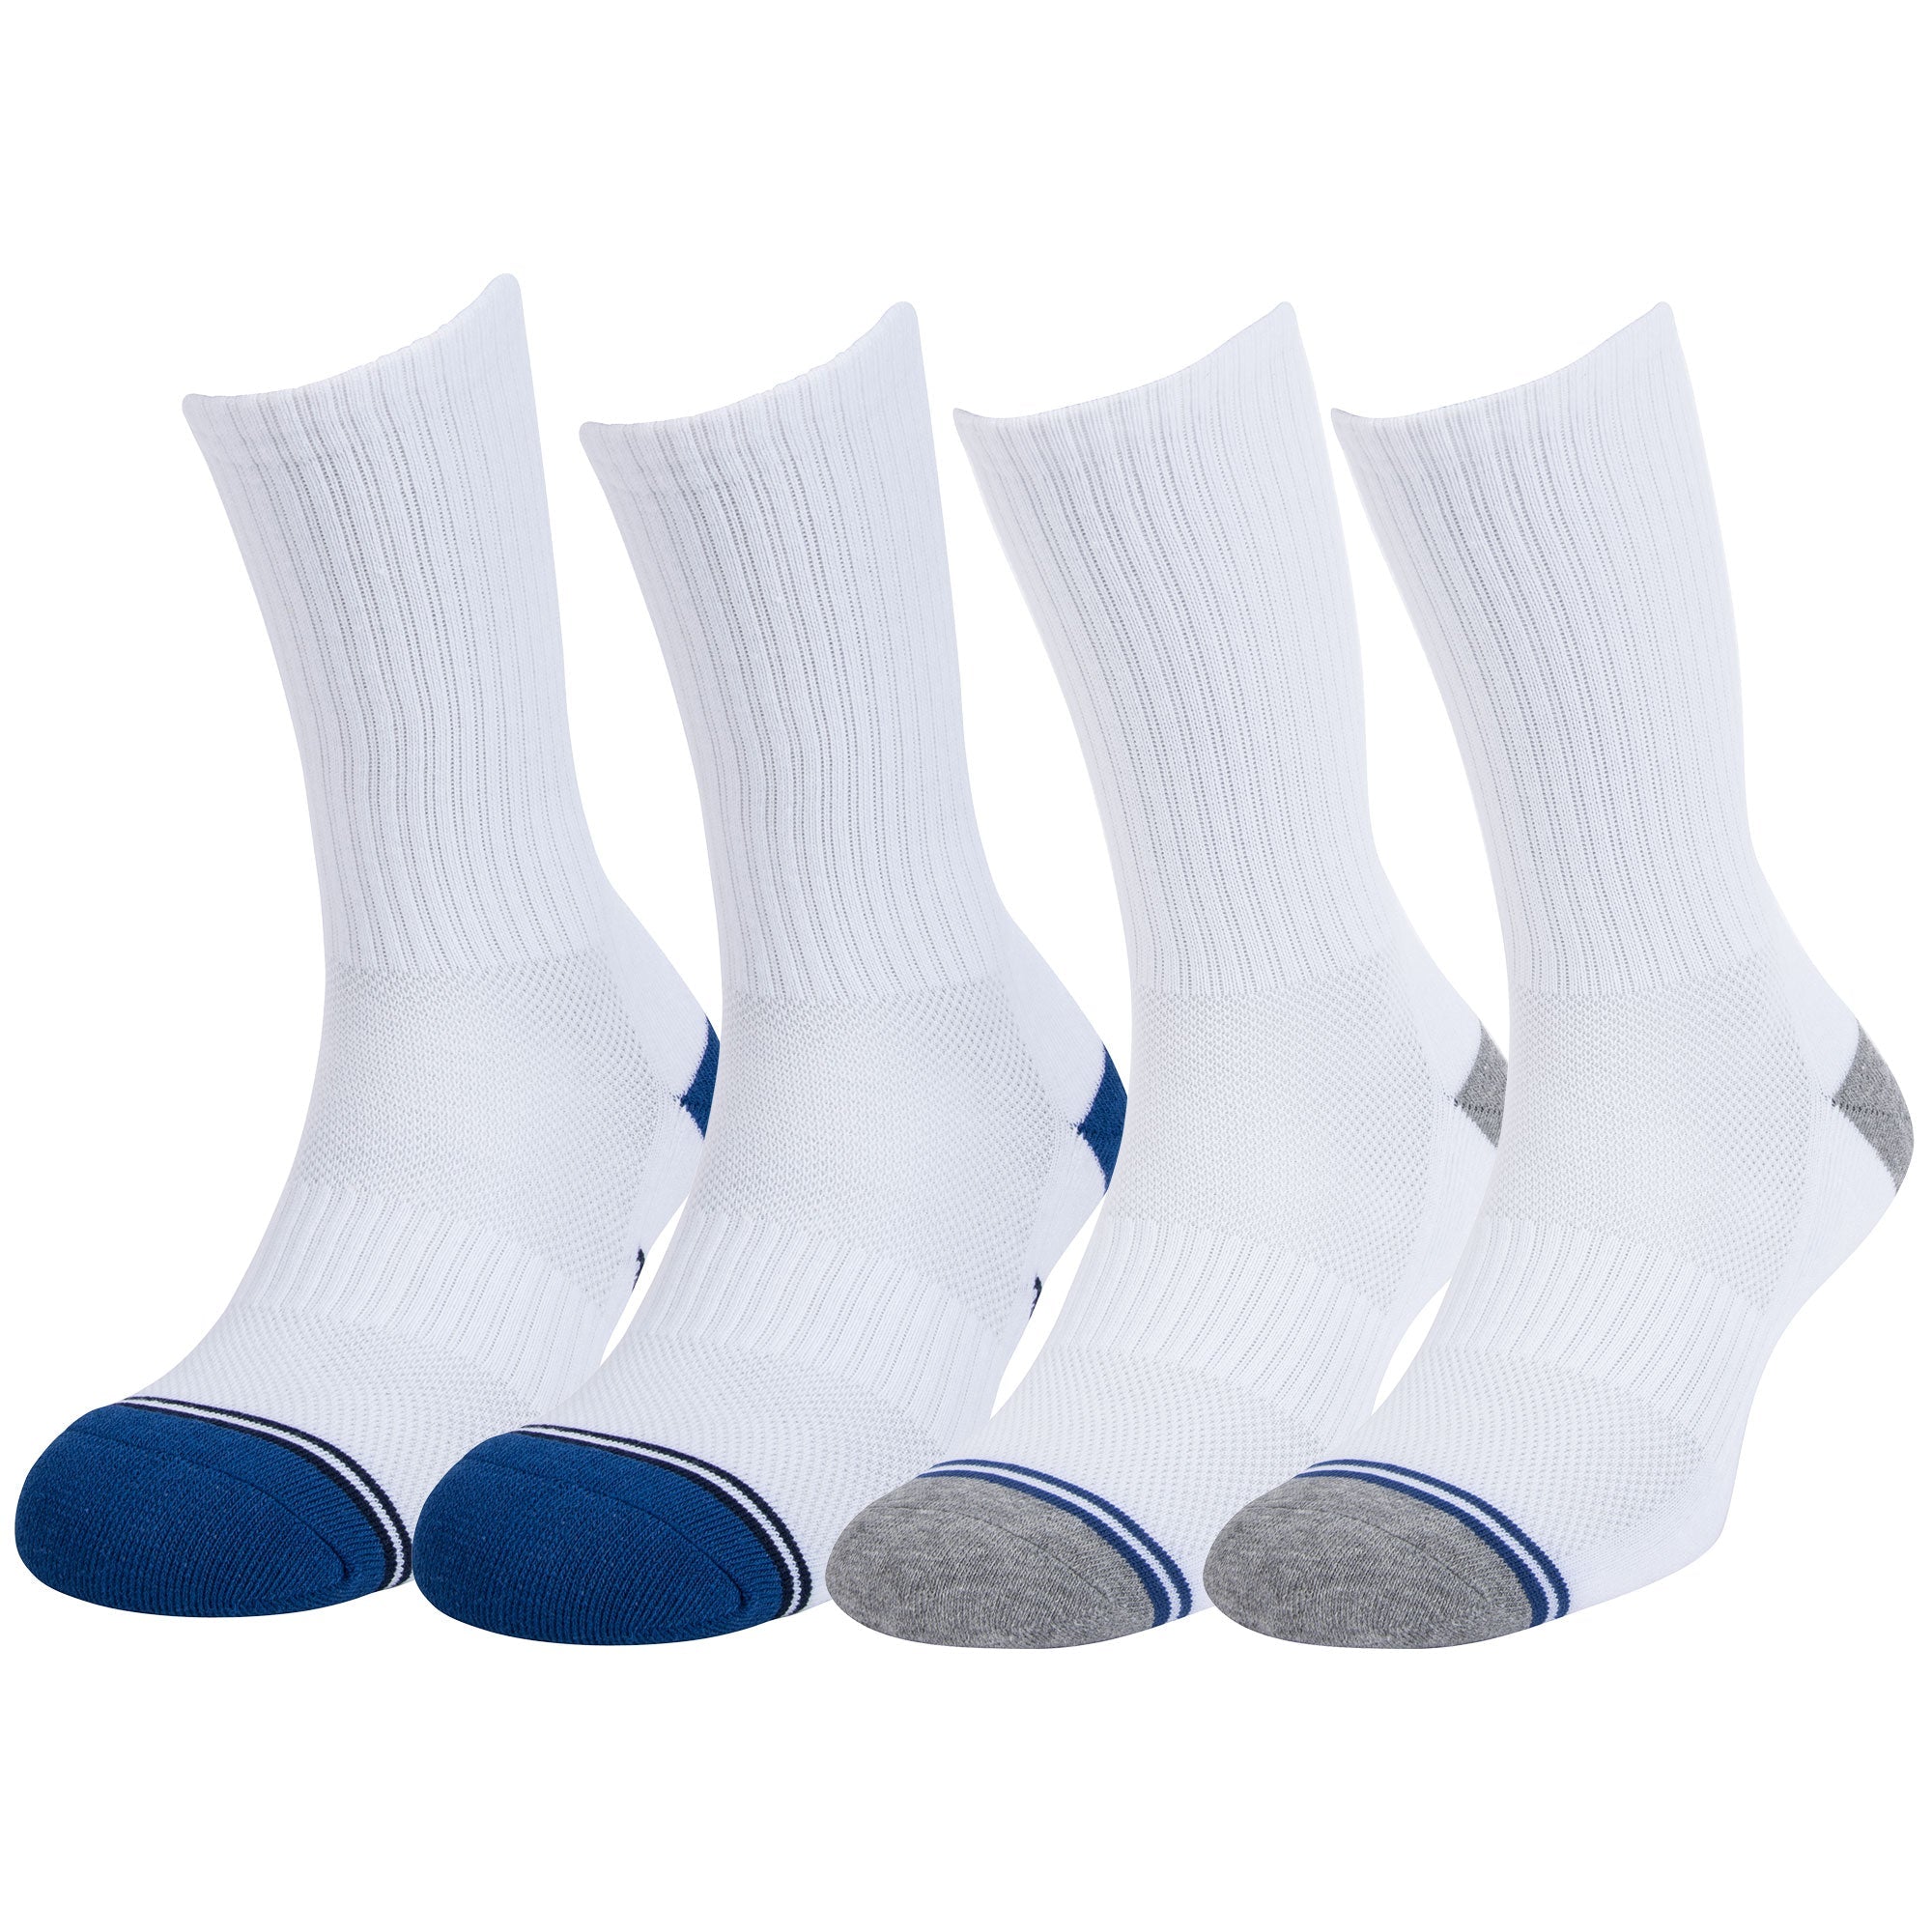  Men's Athletic Socks - Men's Athletic Socks / Men's Activewear:  Clothing, Shoes & Jewelry